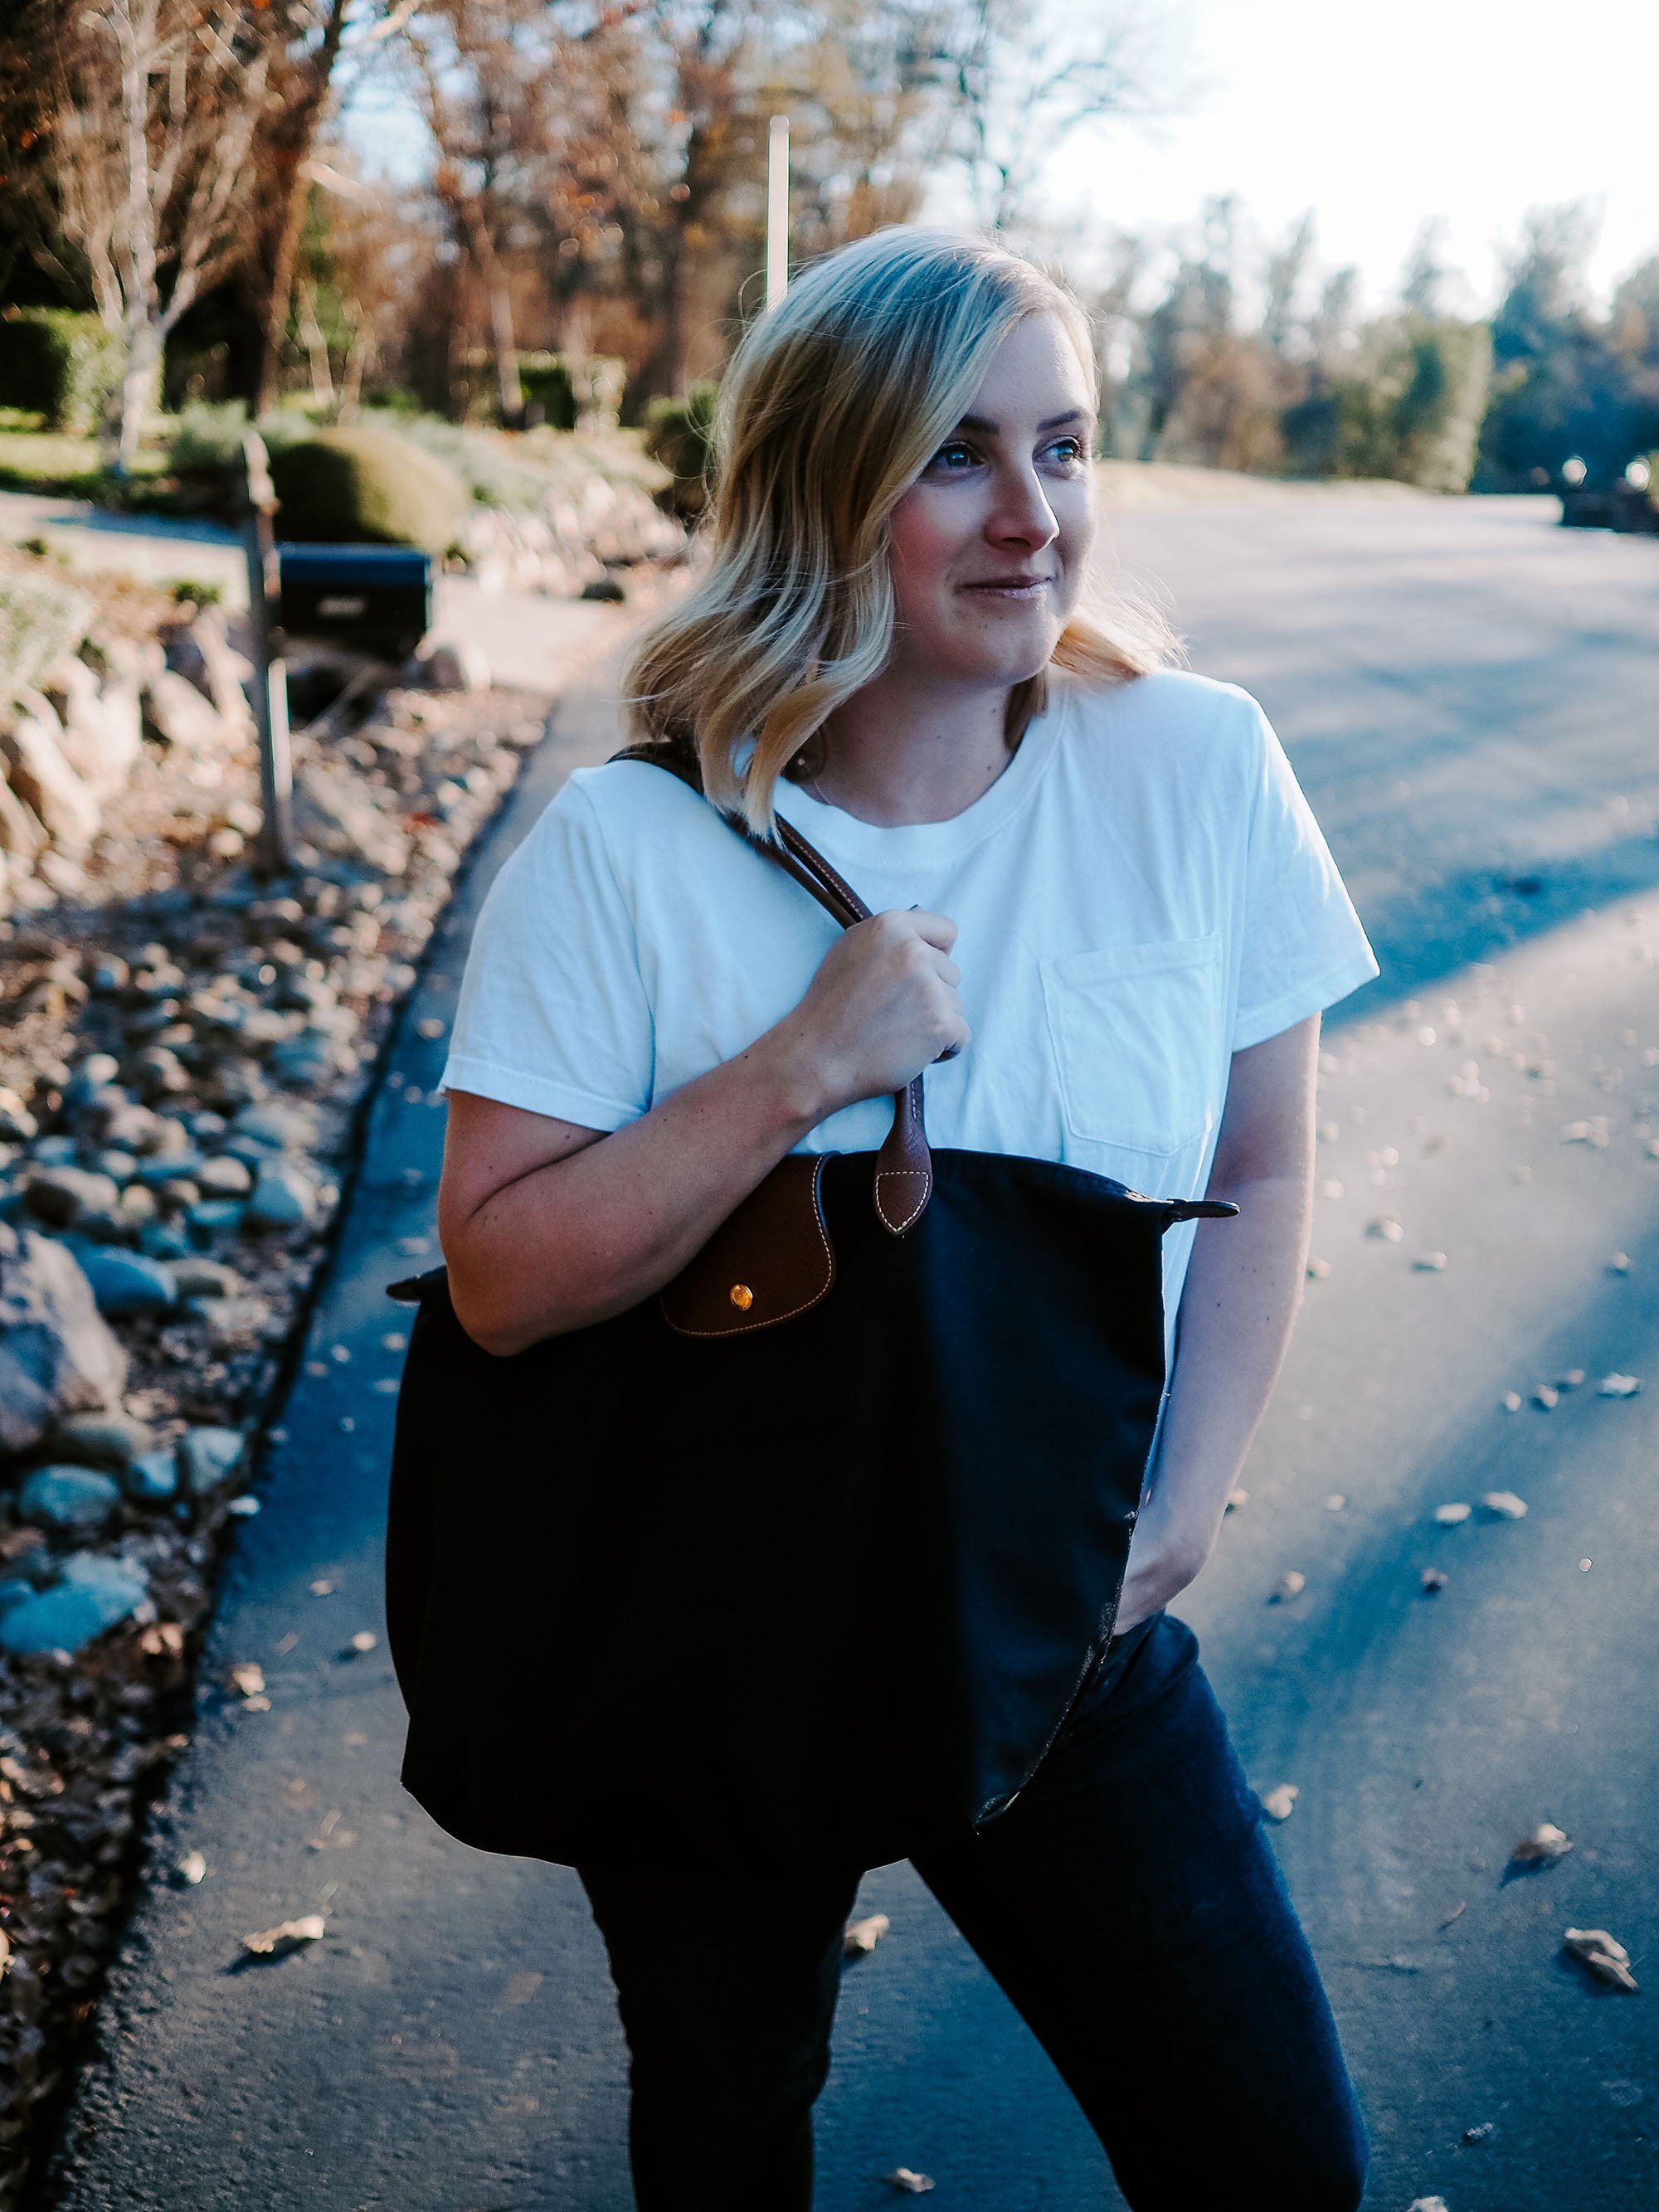 The Longchamp Le Pliage is the perfect every day handbag. Durable, classic, and relatively affordable, this Le Pliage review goes over the pros and cons of one of the most popular bags on the market.